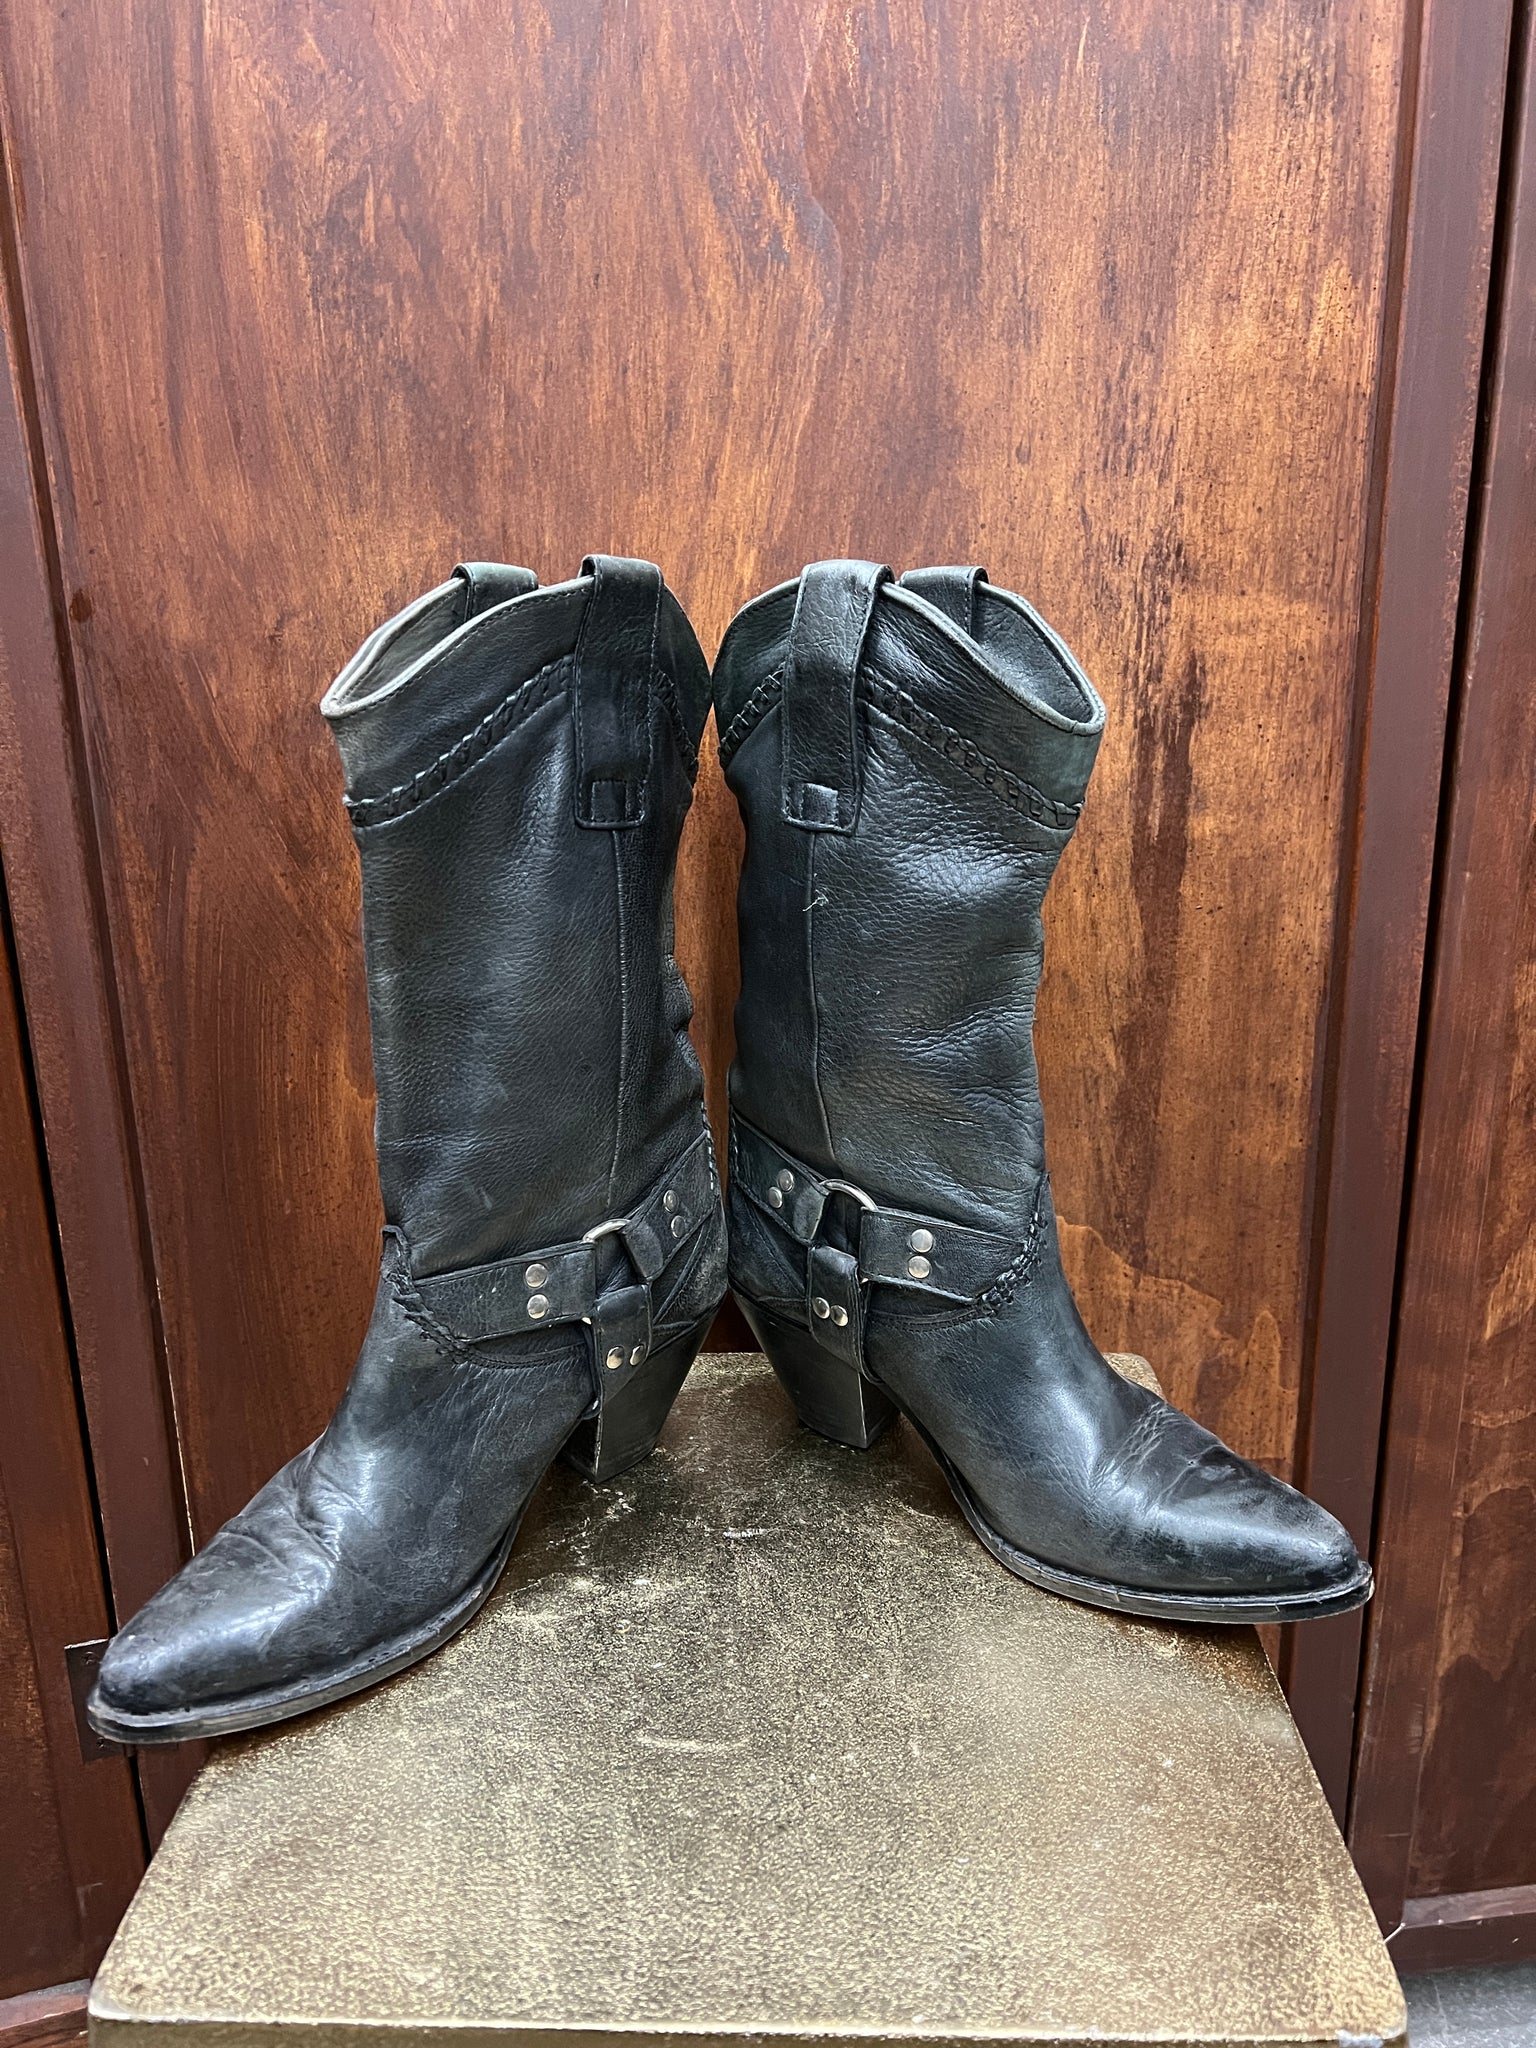 1980s SHOES-BOOTS - Black cowboy/ motorcycle boots